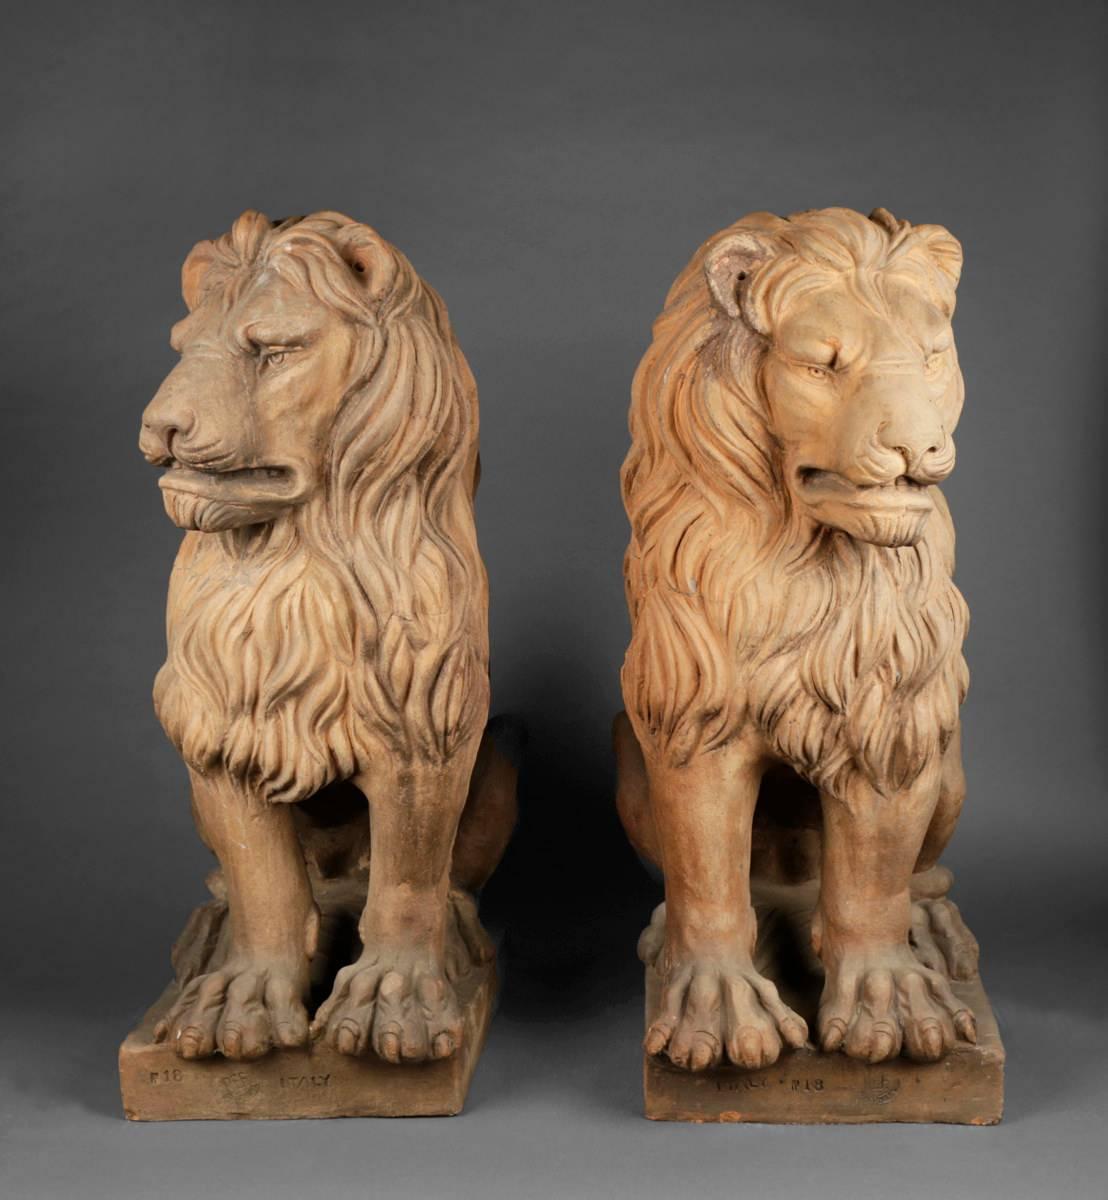 Each seated on a squared plinth with paws resting over edges of the plinths, one looking to right, the other looking to left.
Stamped Impruneta Italy and no. 18.
Likely dating to first half of the 20th century.